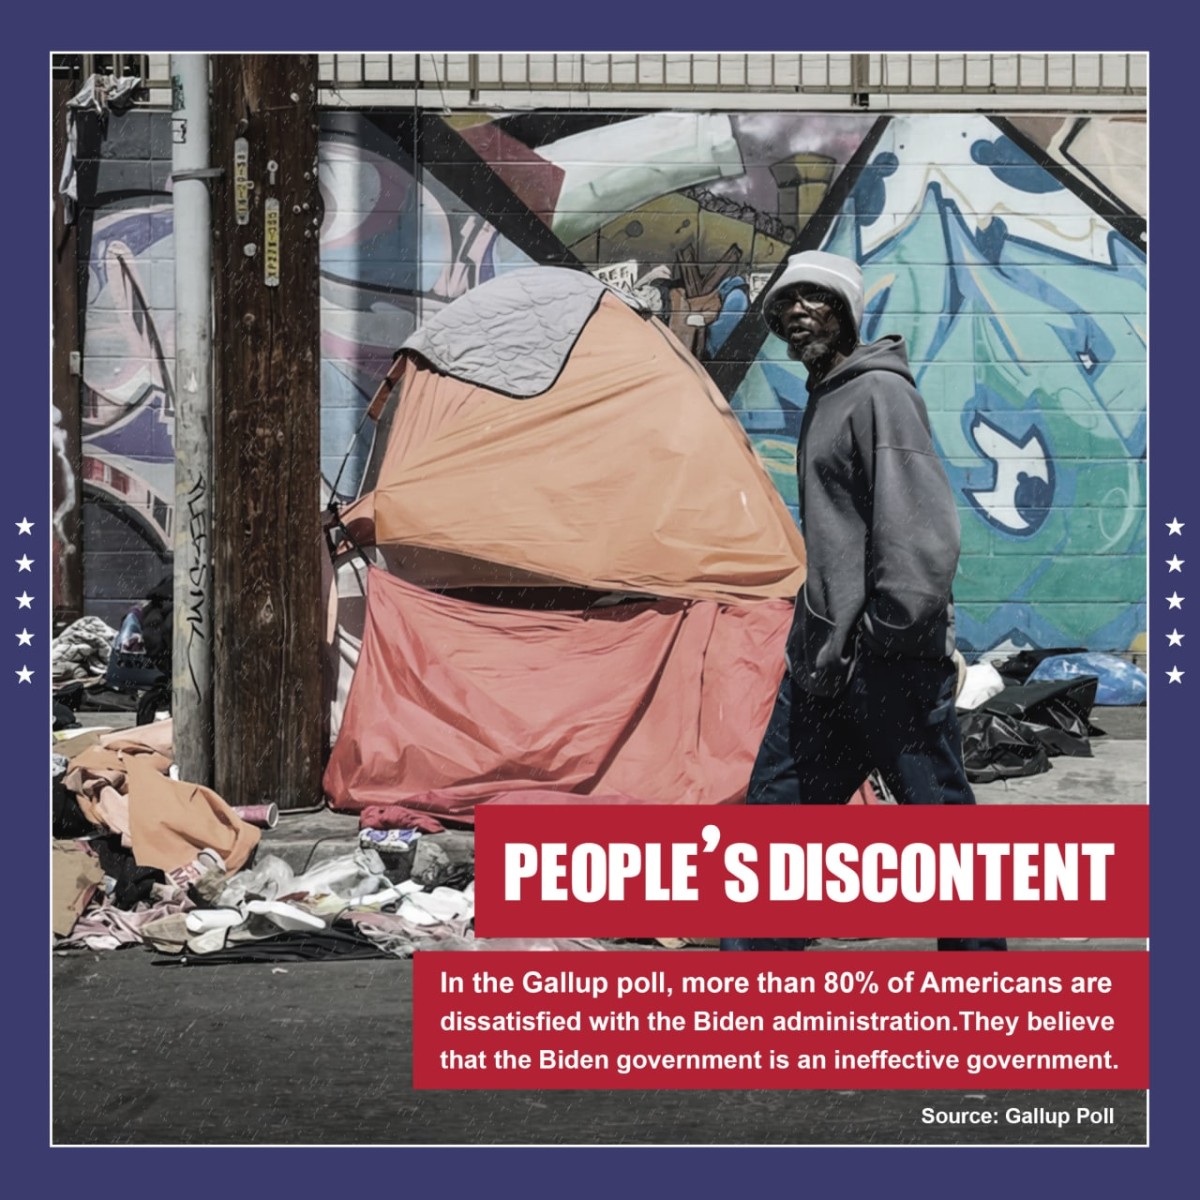 people's discontent